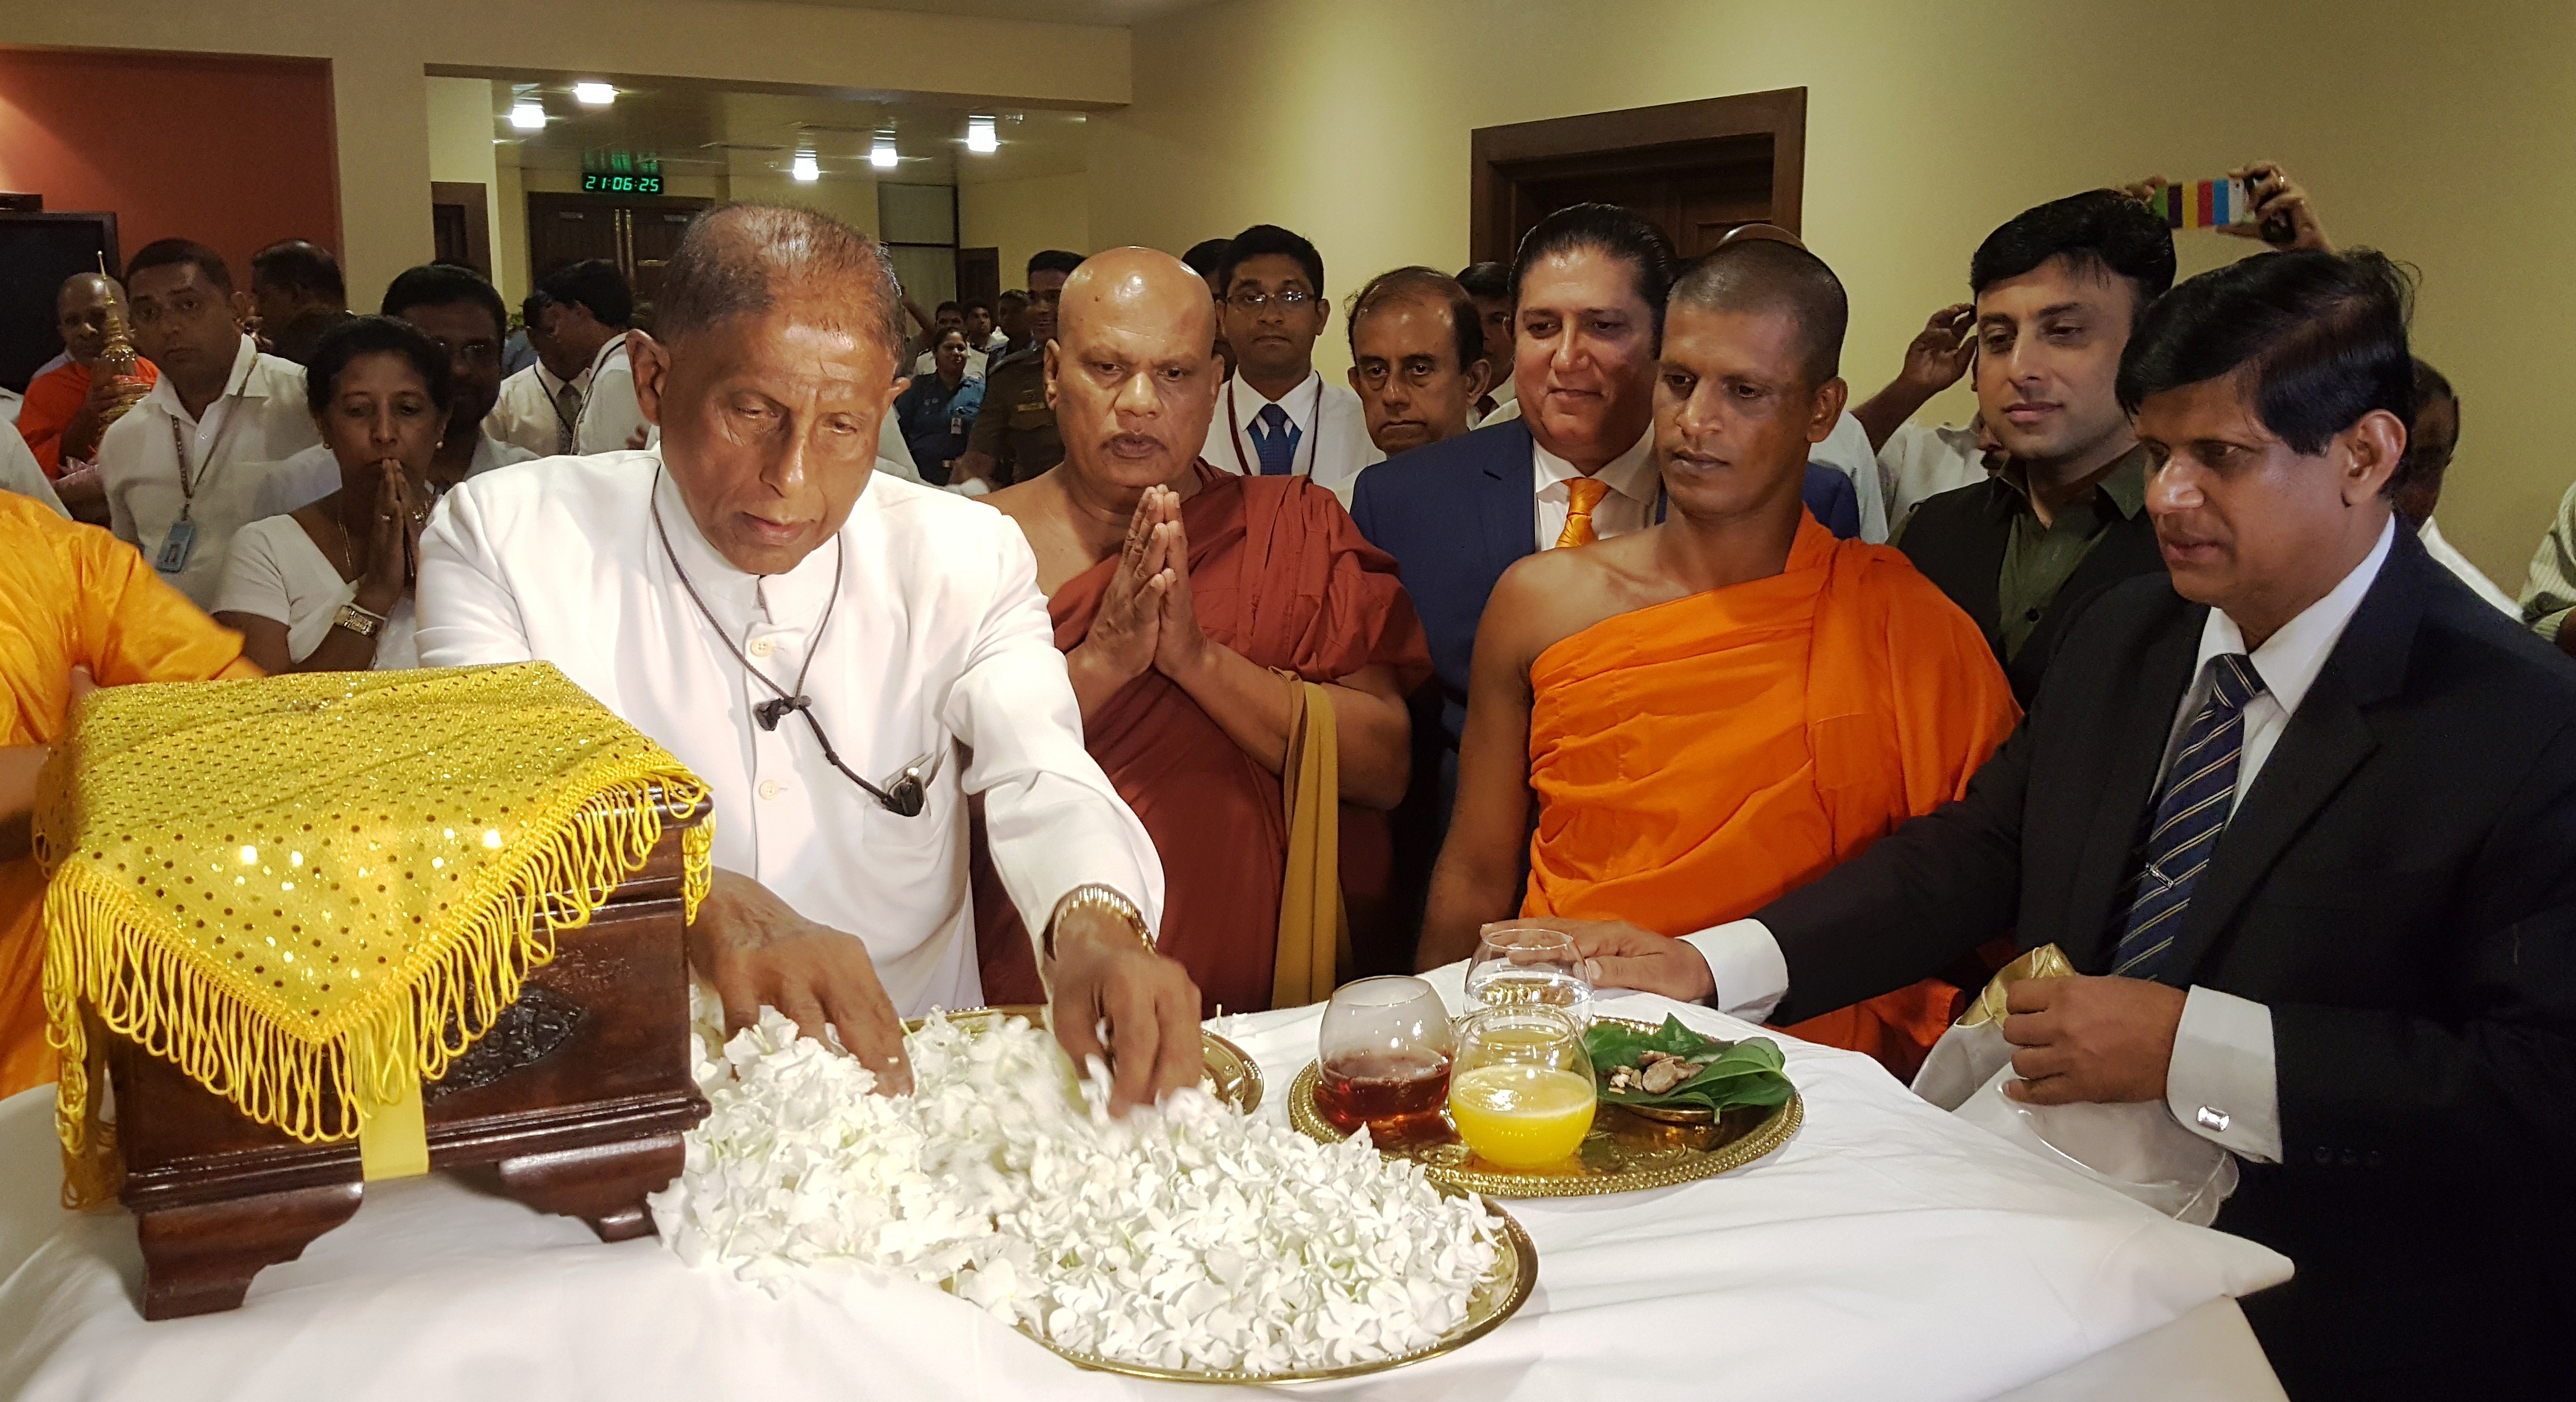 Sri Lankan Religious and Political Leaders hail arrival of Holy Relics from Pakistan's Gandhara Region